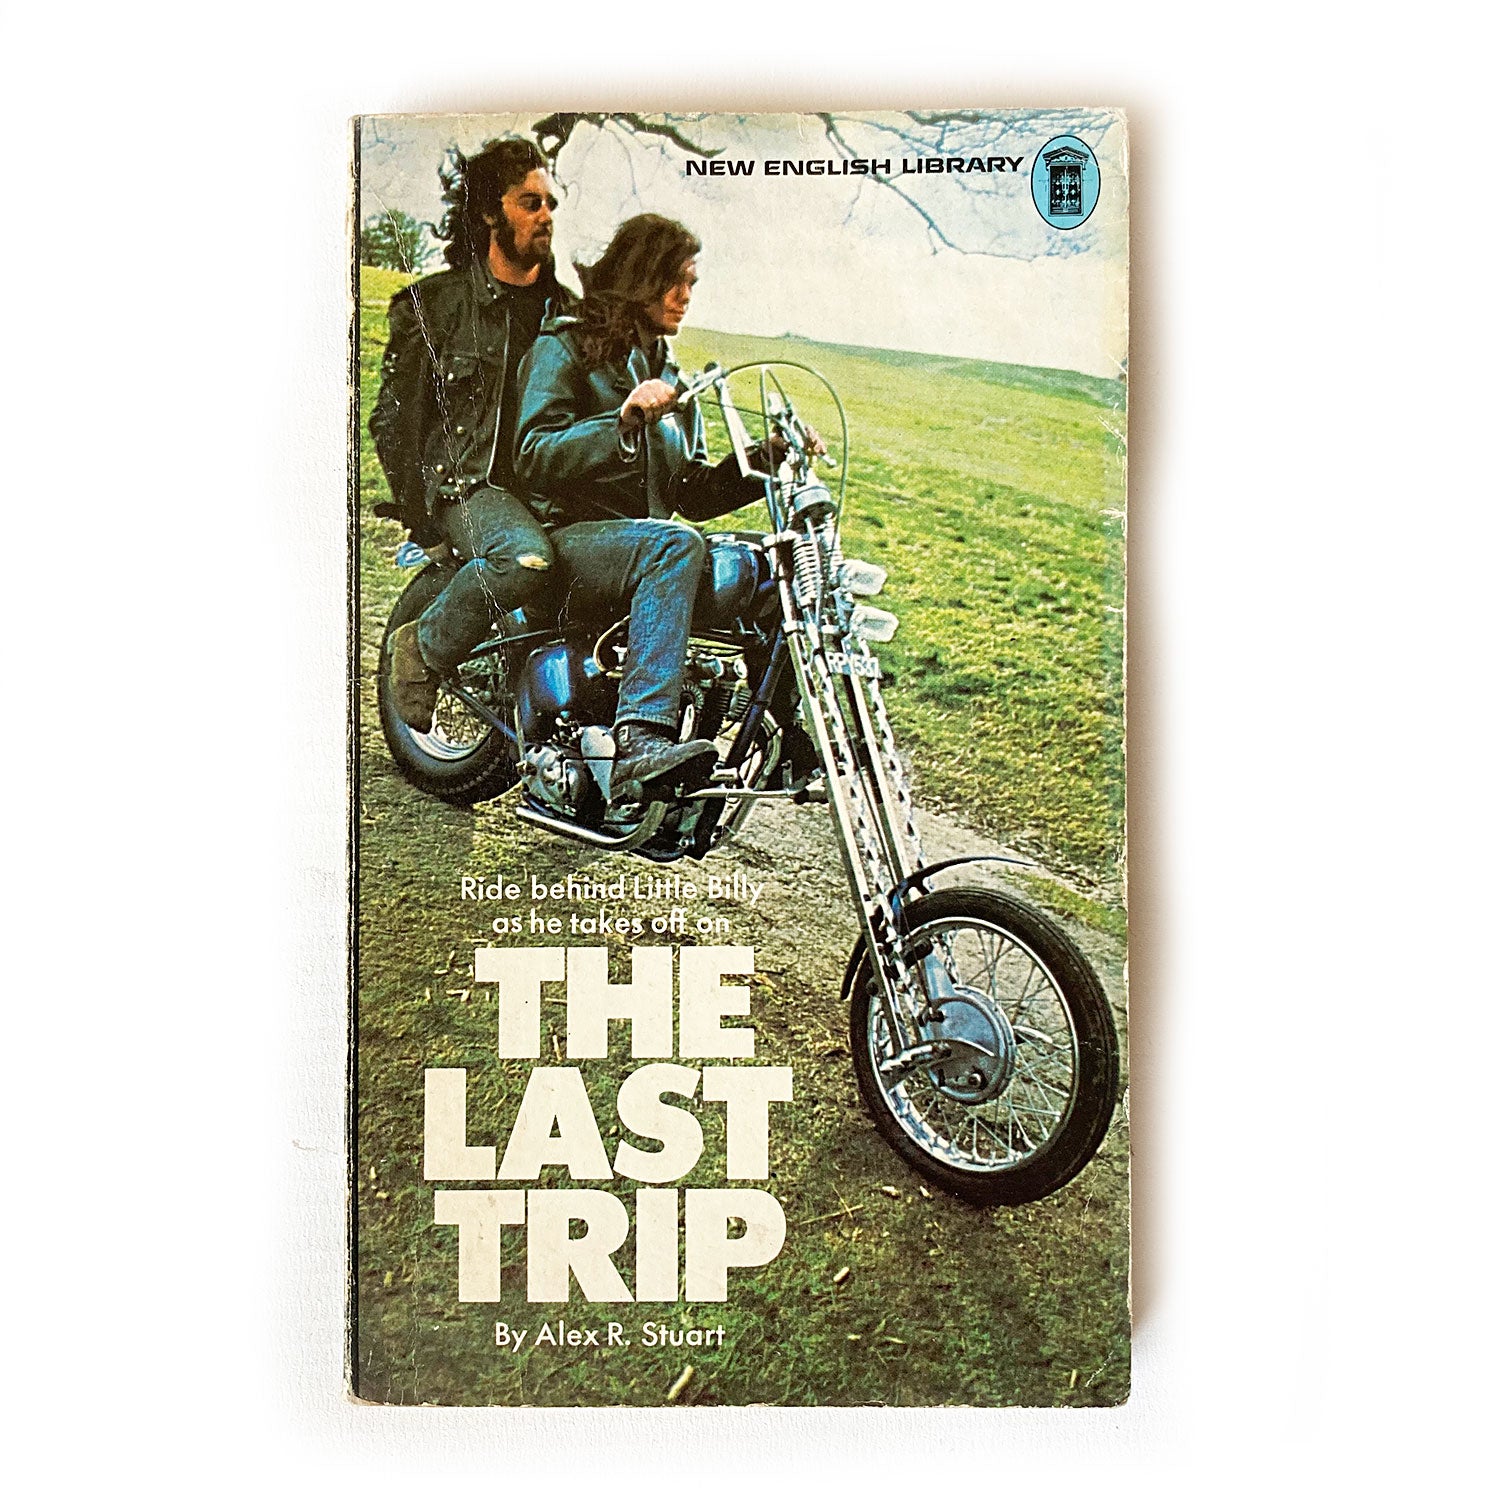 The Last Trip by Alex R. Stuart, New English Library paperback, 1975